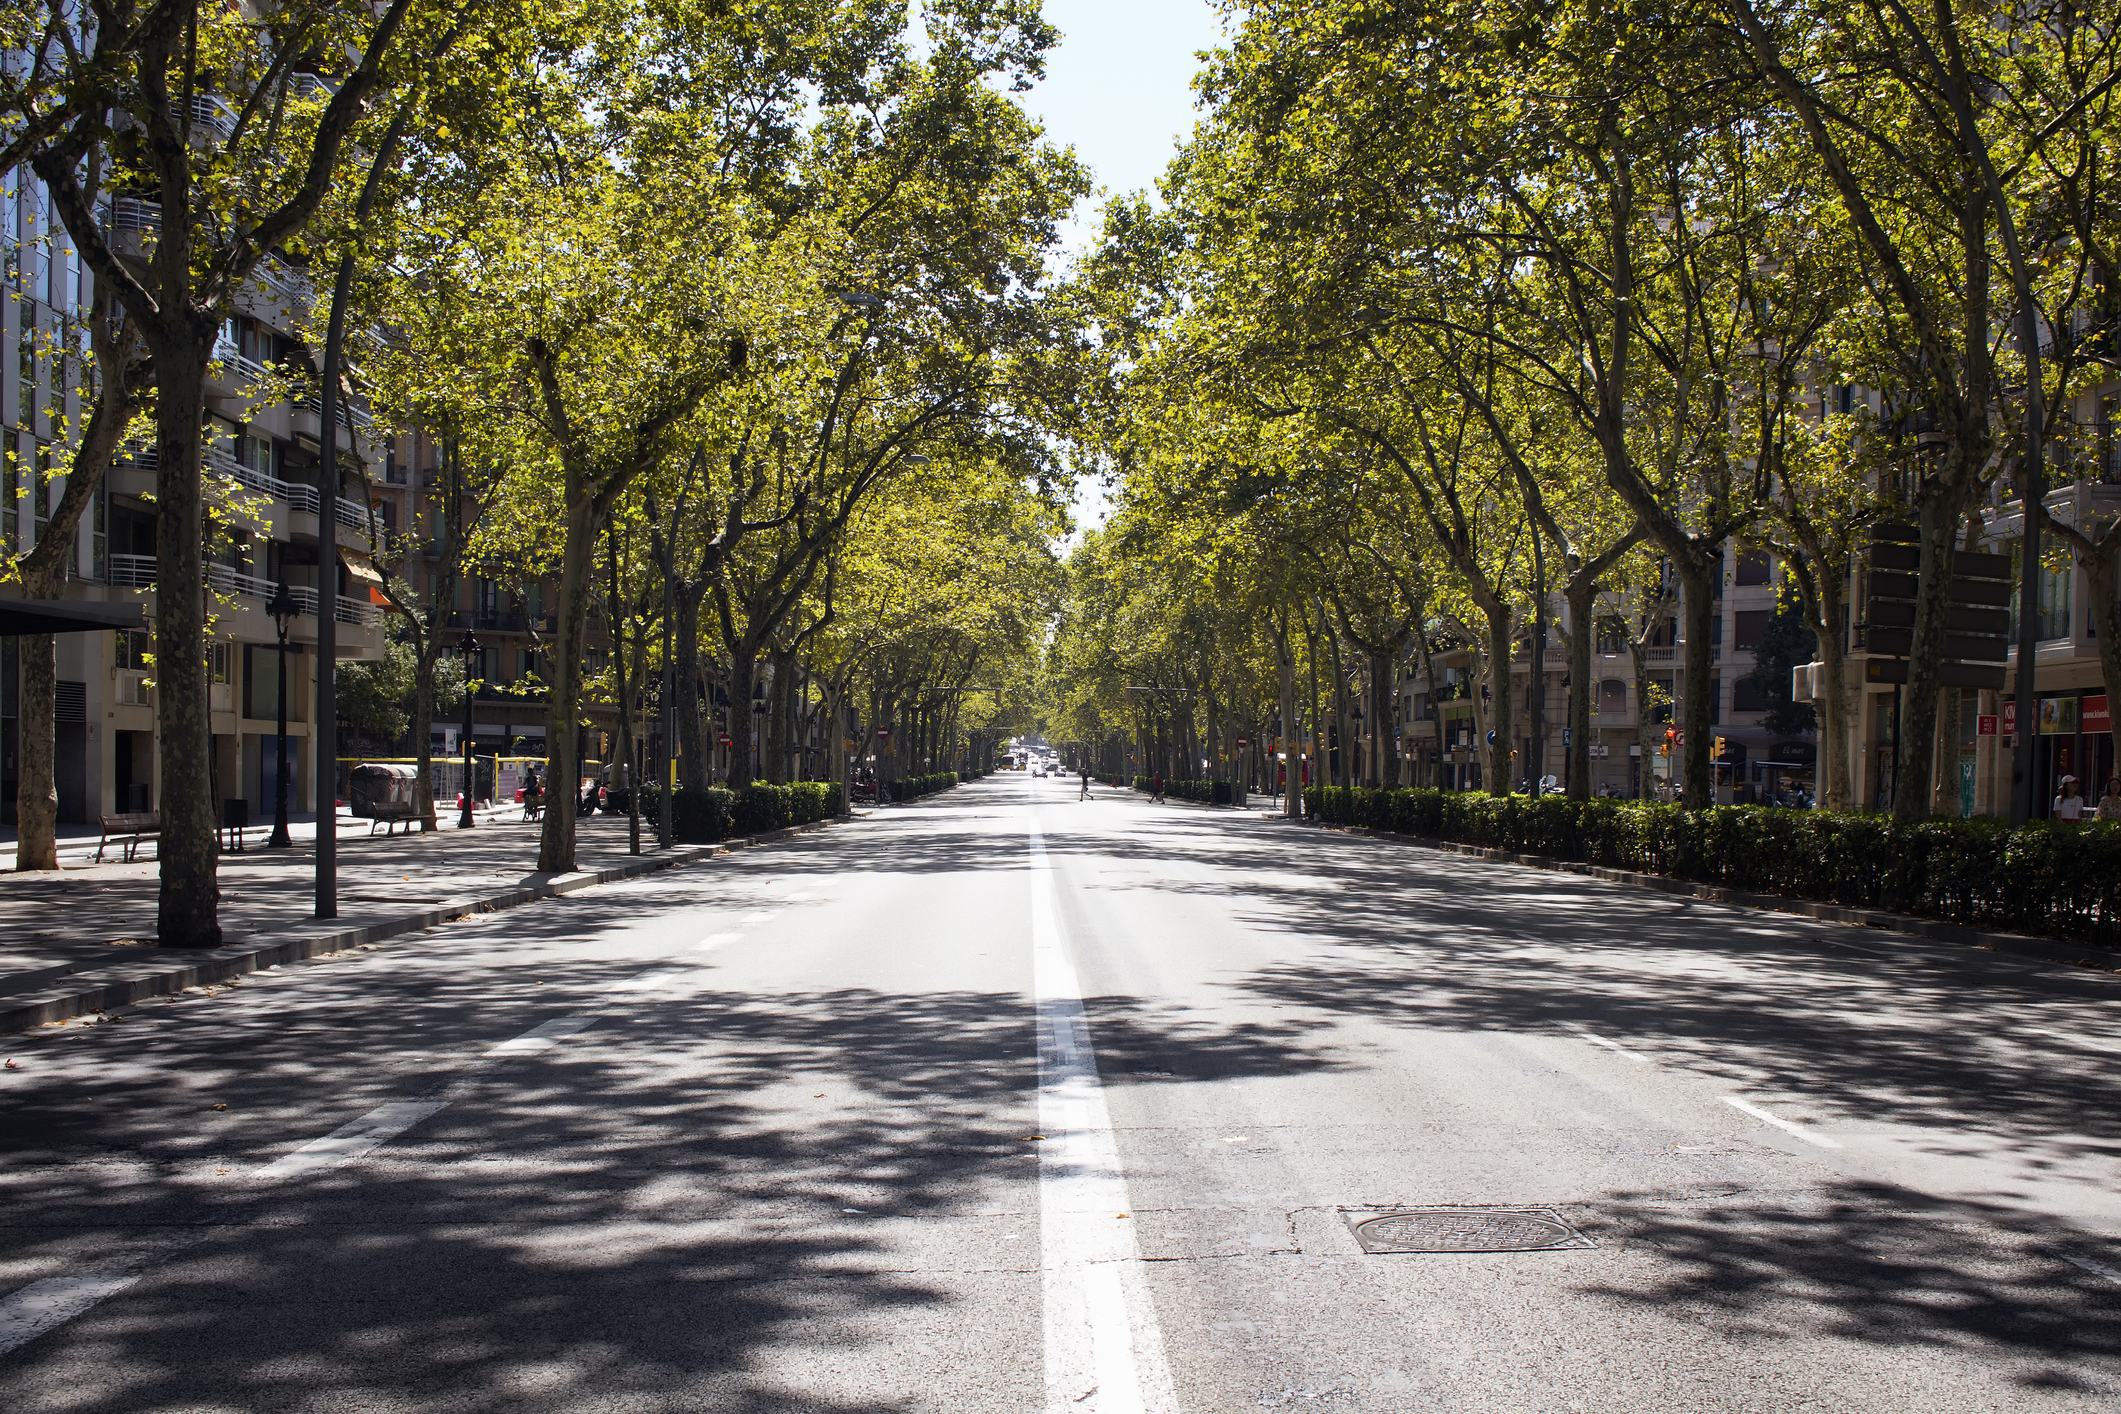 View of one of the main avenues called "Gran Via de les Corts Catalanes"